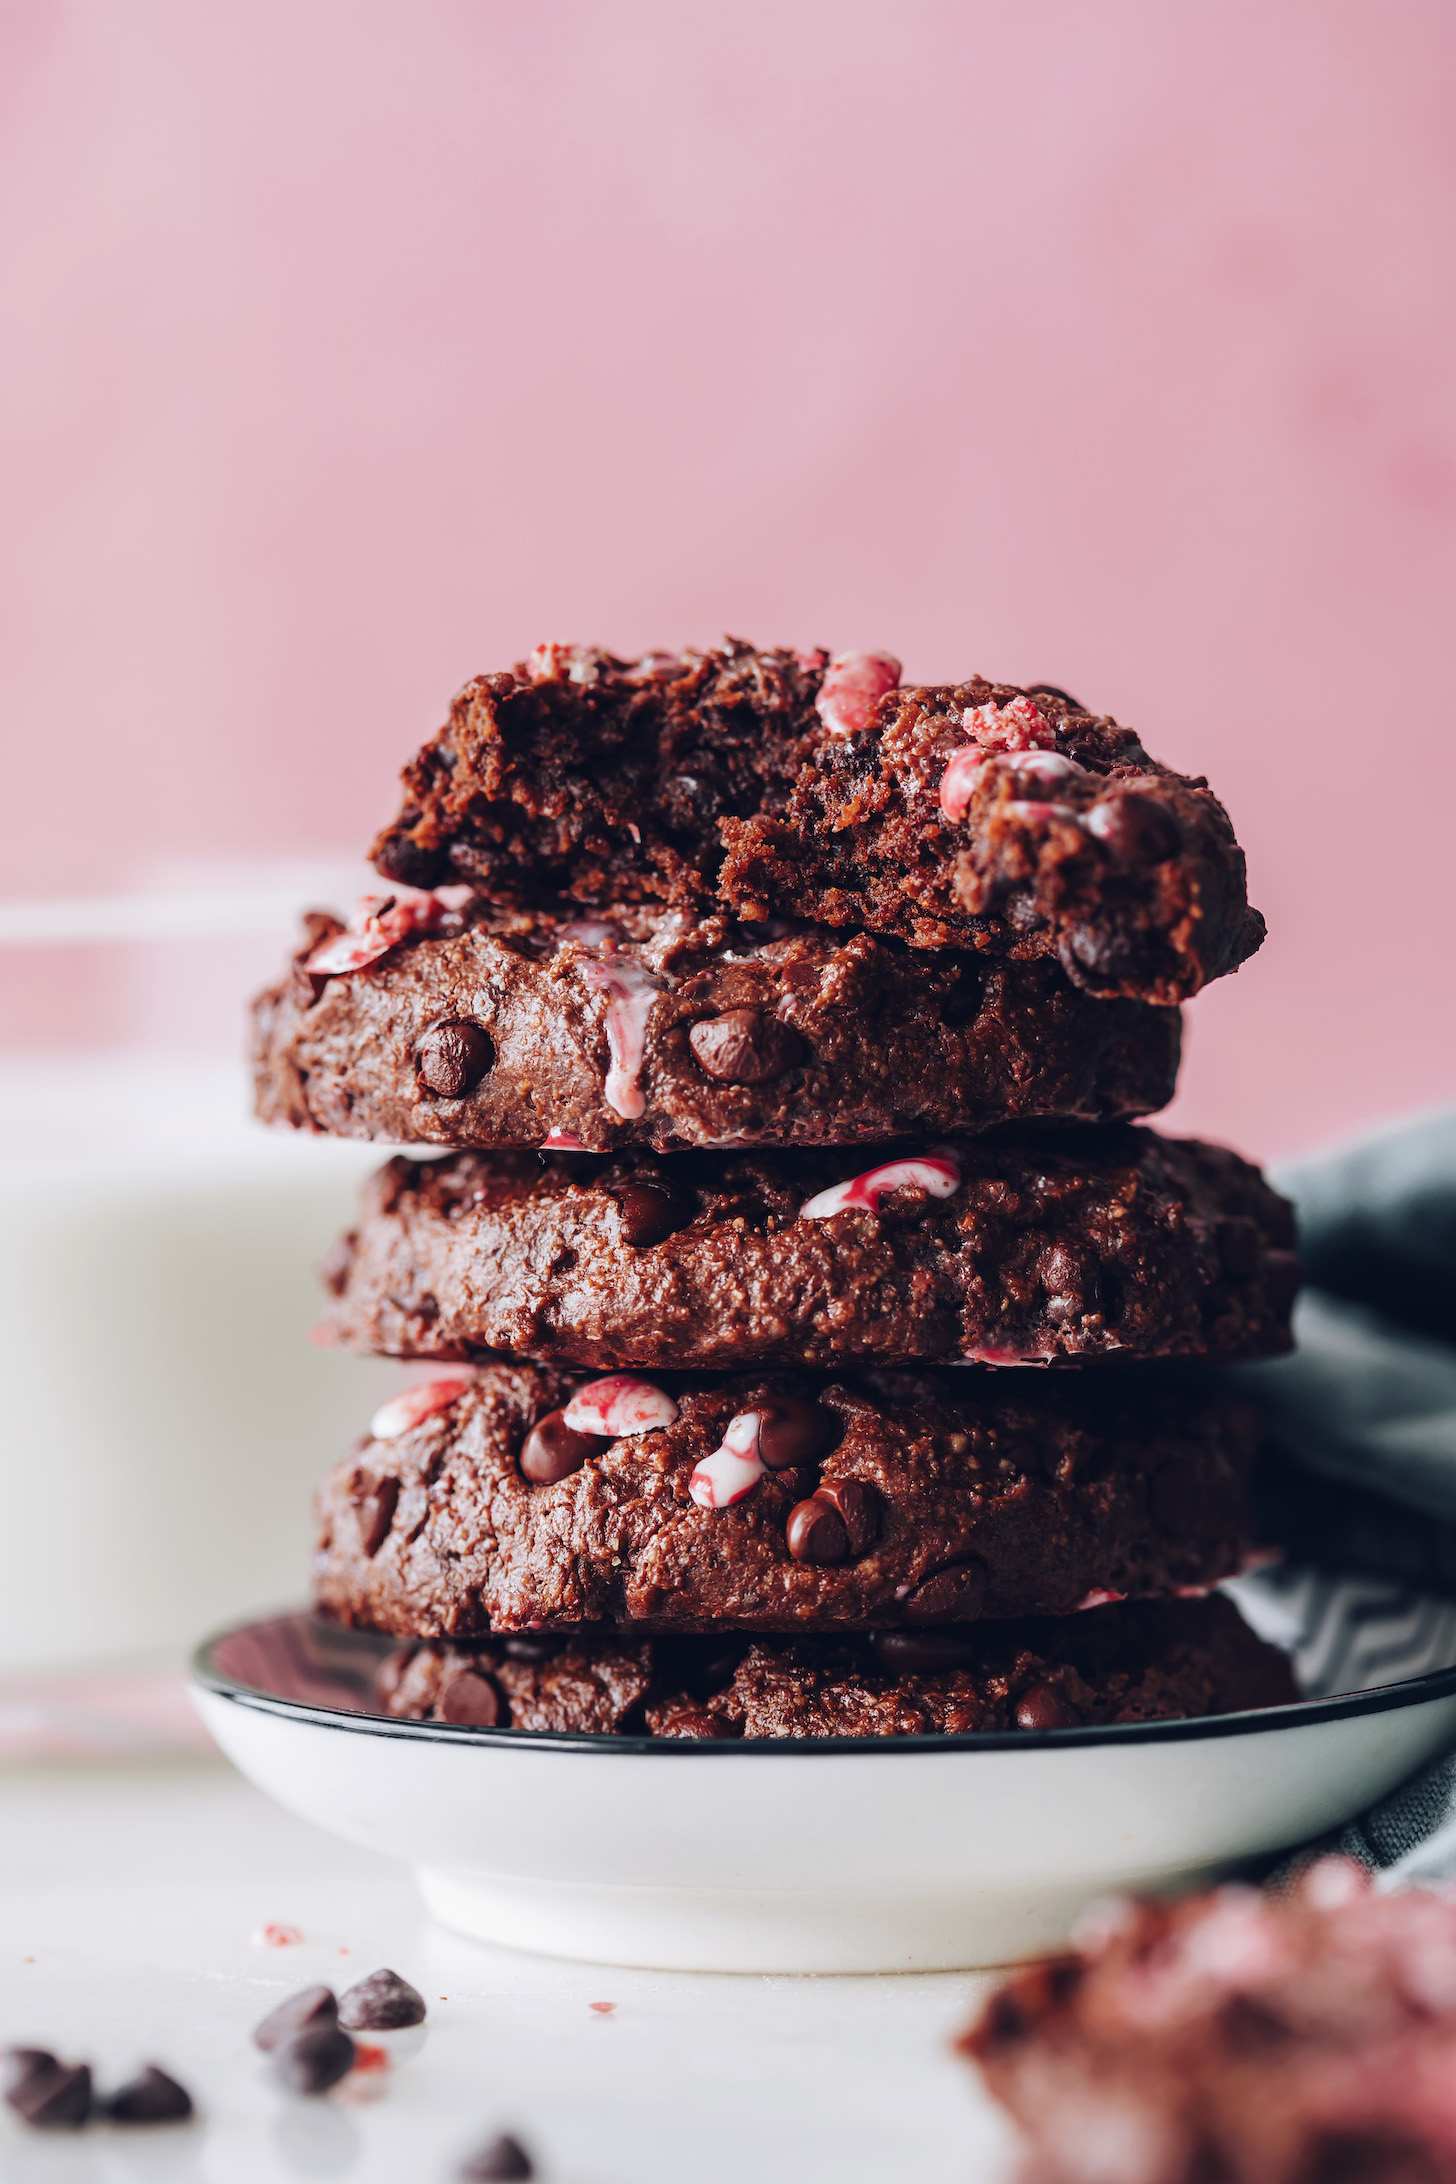 Showing the fudgy inside texture of a chocolate peppermint cookie on a stack of more cookies